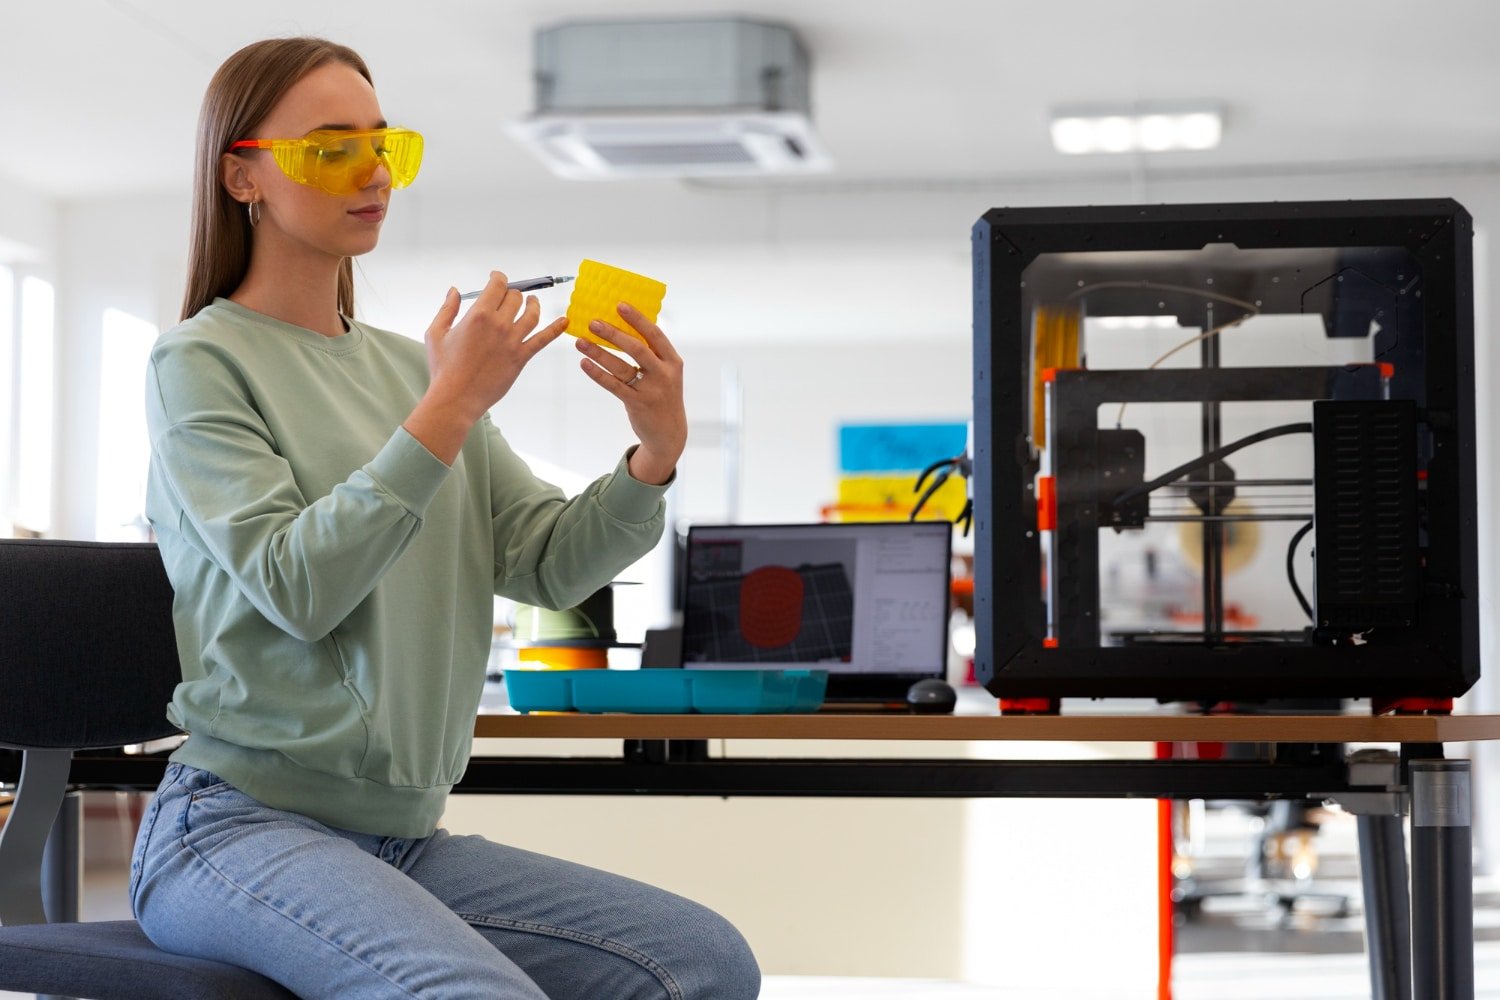 You are currently viewing Create With Precision With Snapmaker’s 3D Printing Technology